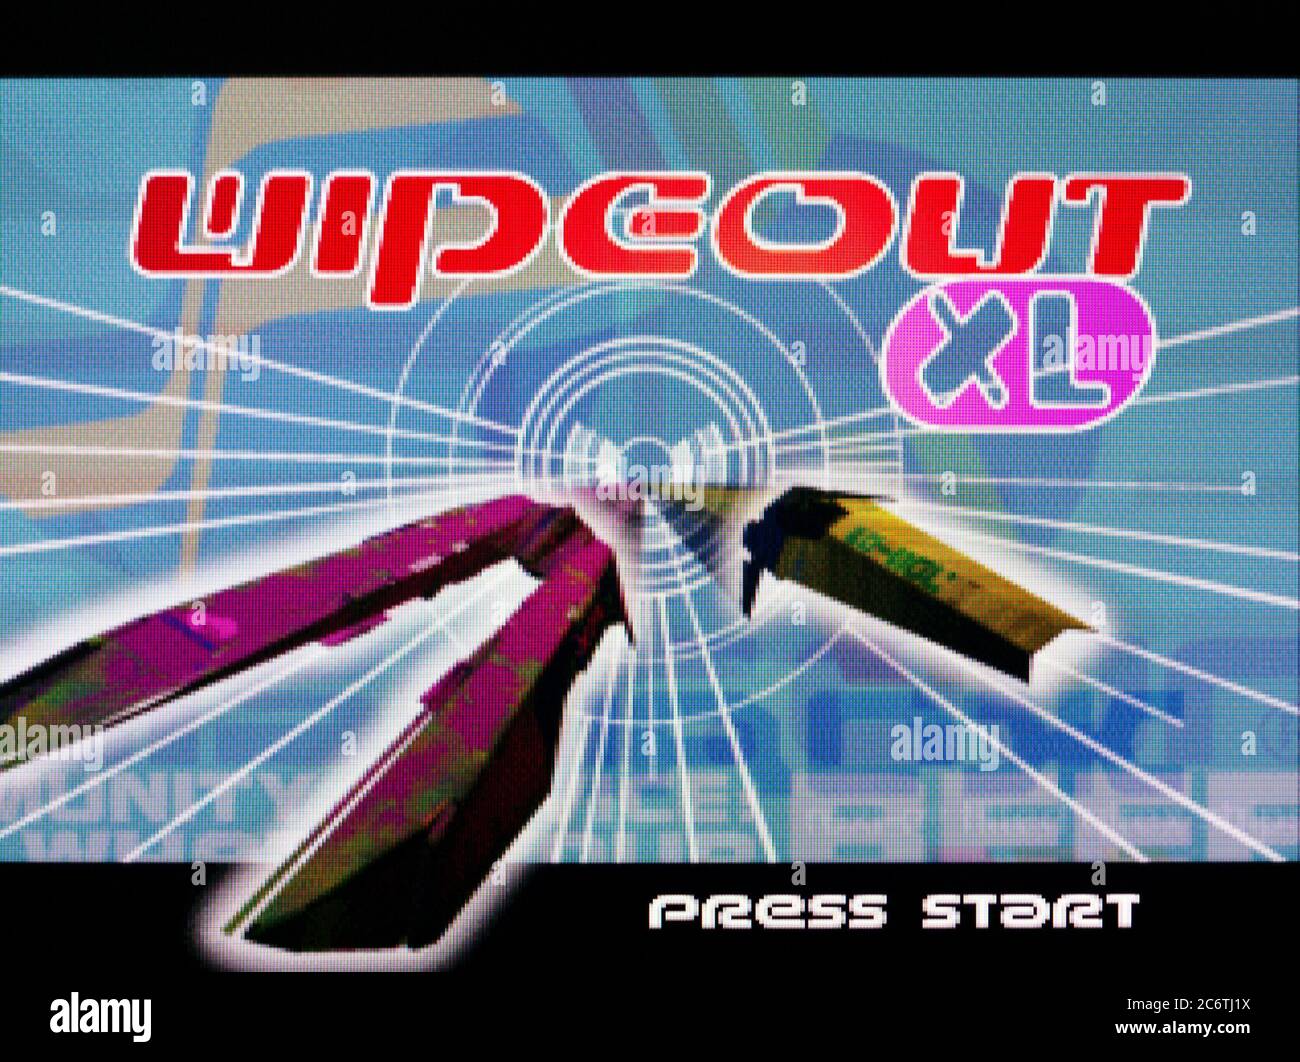 wipeout playstation 1